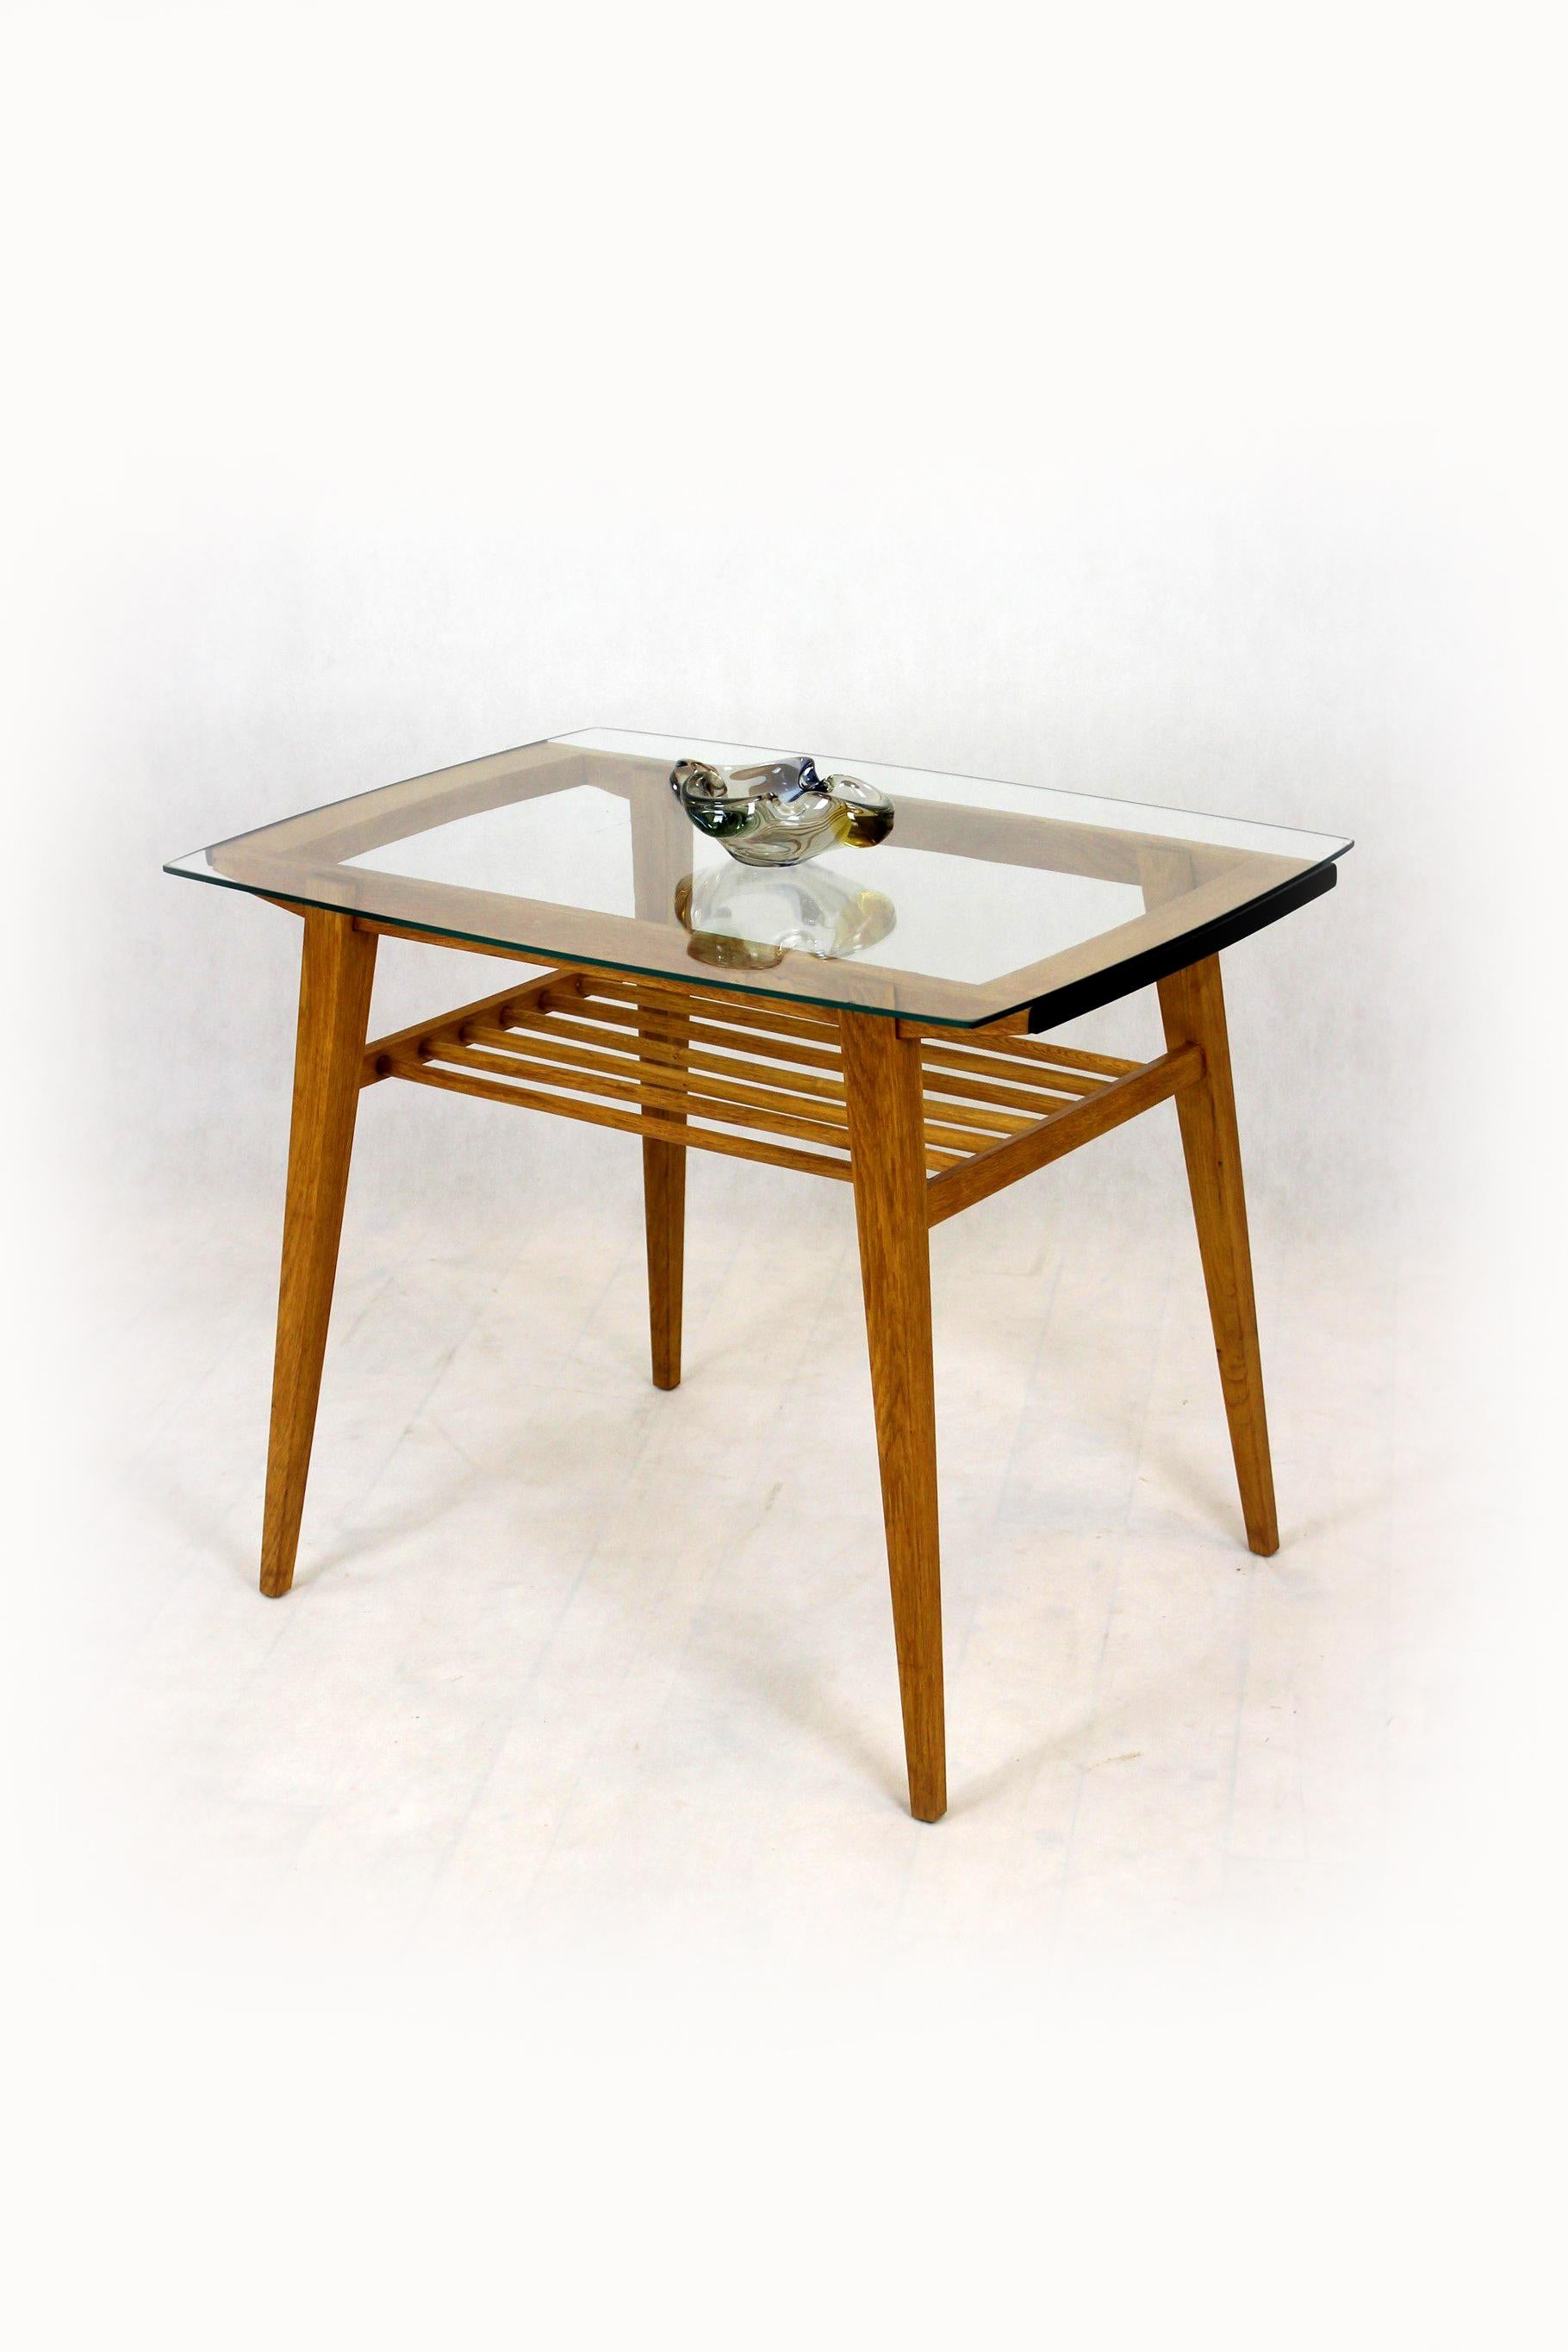 A unique coffee table, a combination of a wooden structure and glass. It was produced by Drevozpracujici Druzstvo in the 1960s in Czechoslovakia.
The table has been completely restored, lacquered in a satin finish. The glass on the table top is